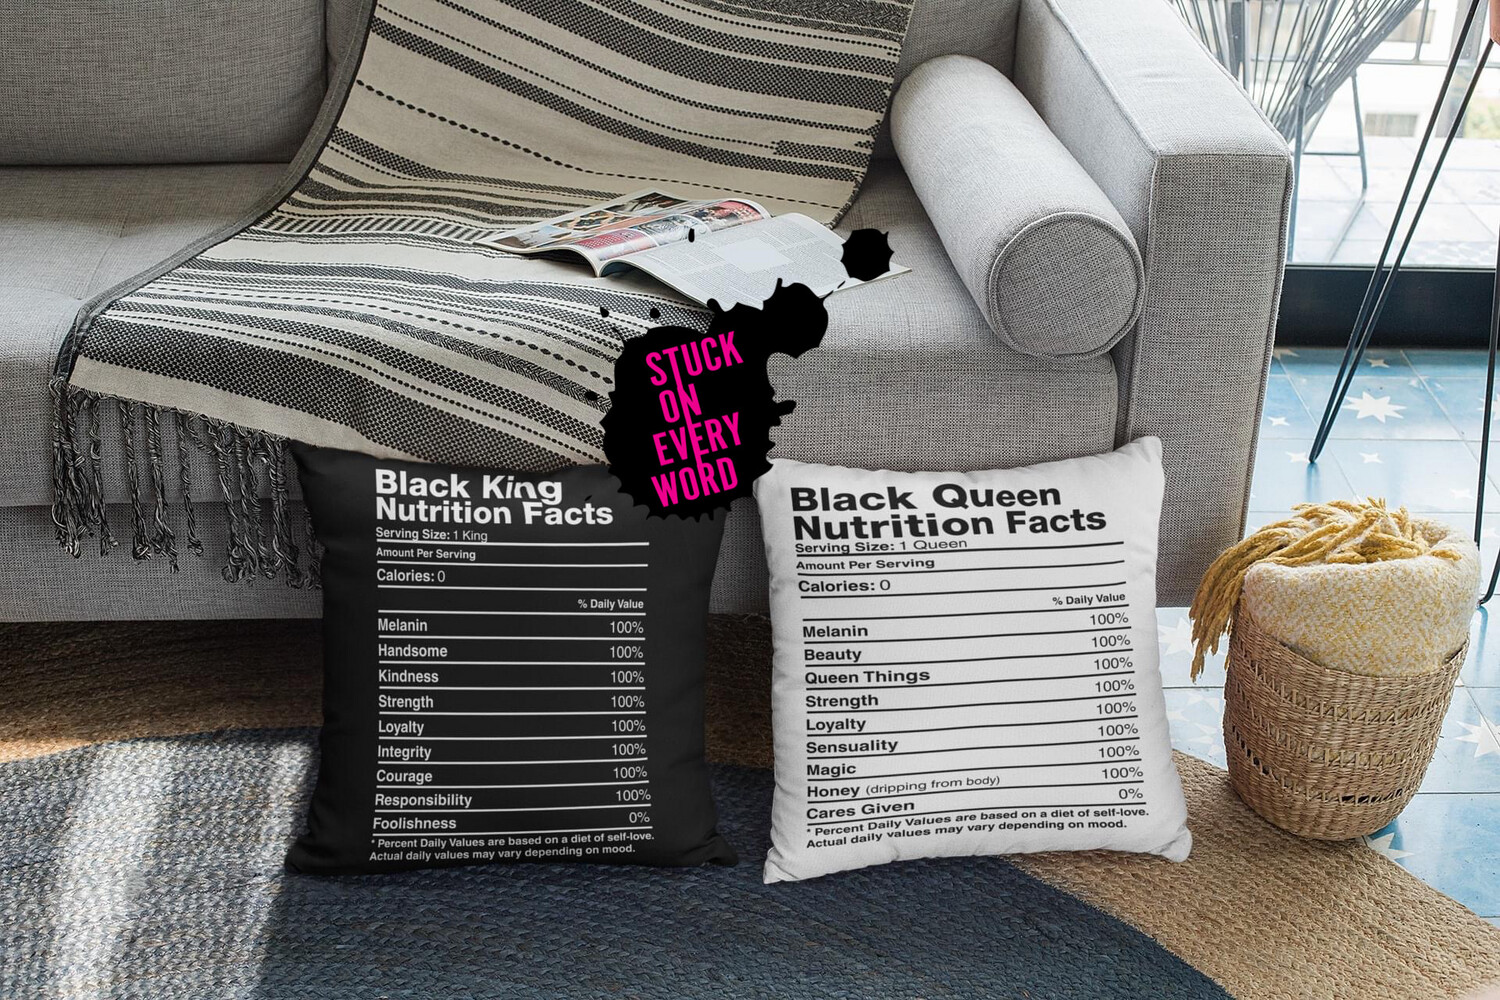 Black Queen Nutrition Facts (White) (Pillow)